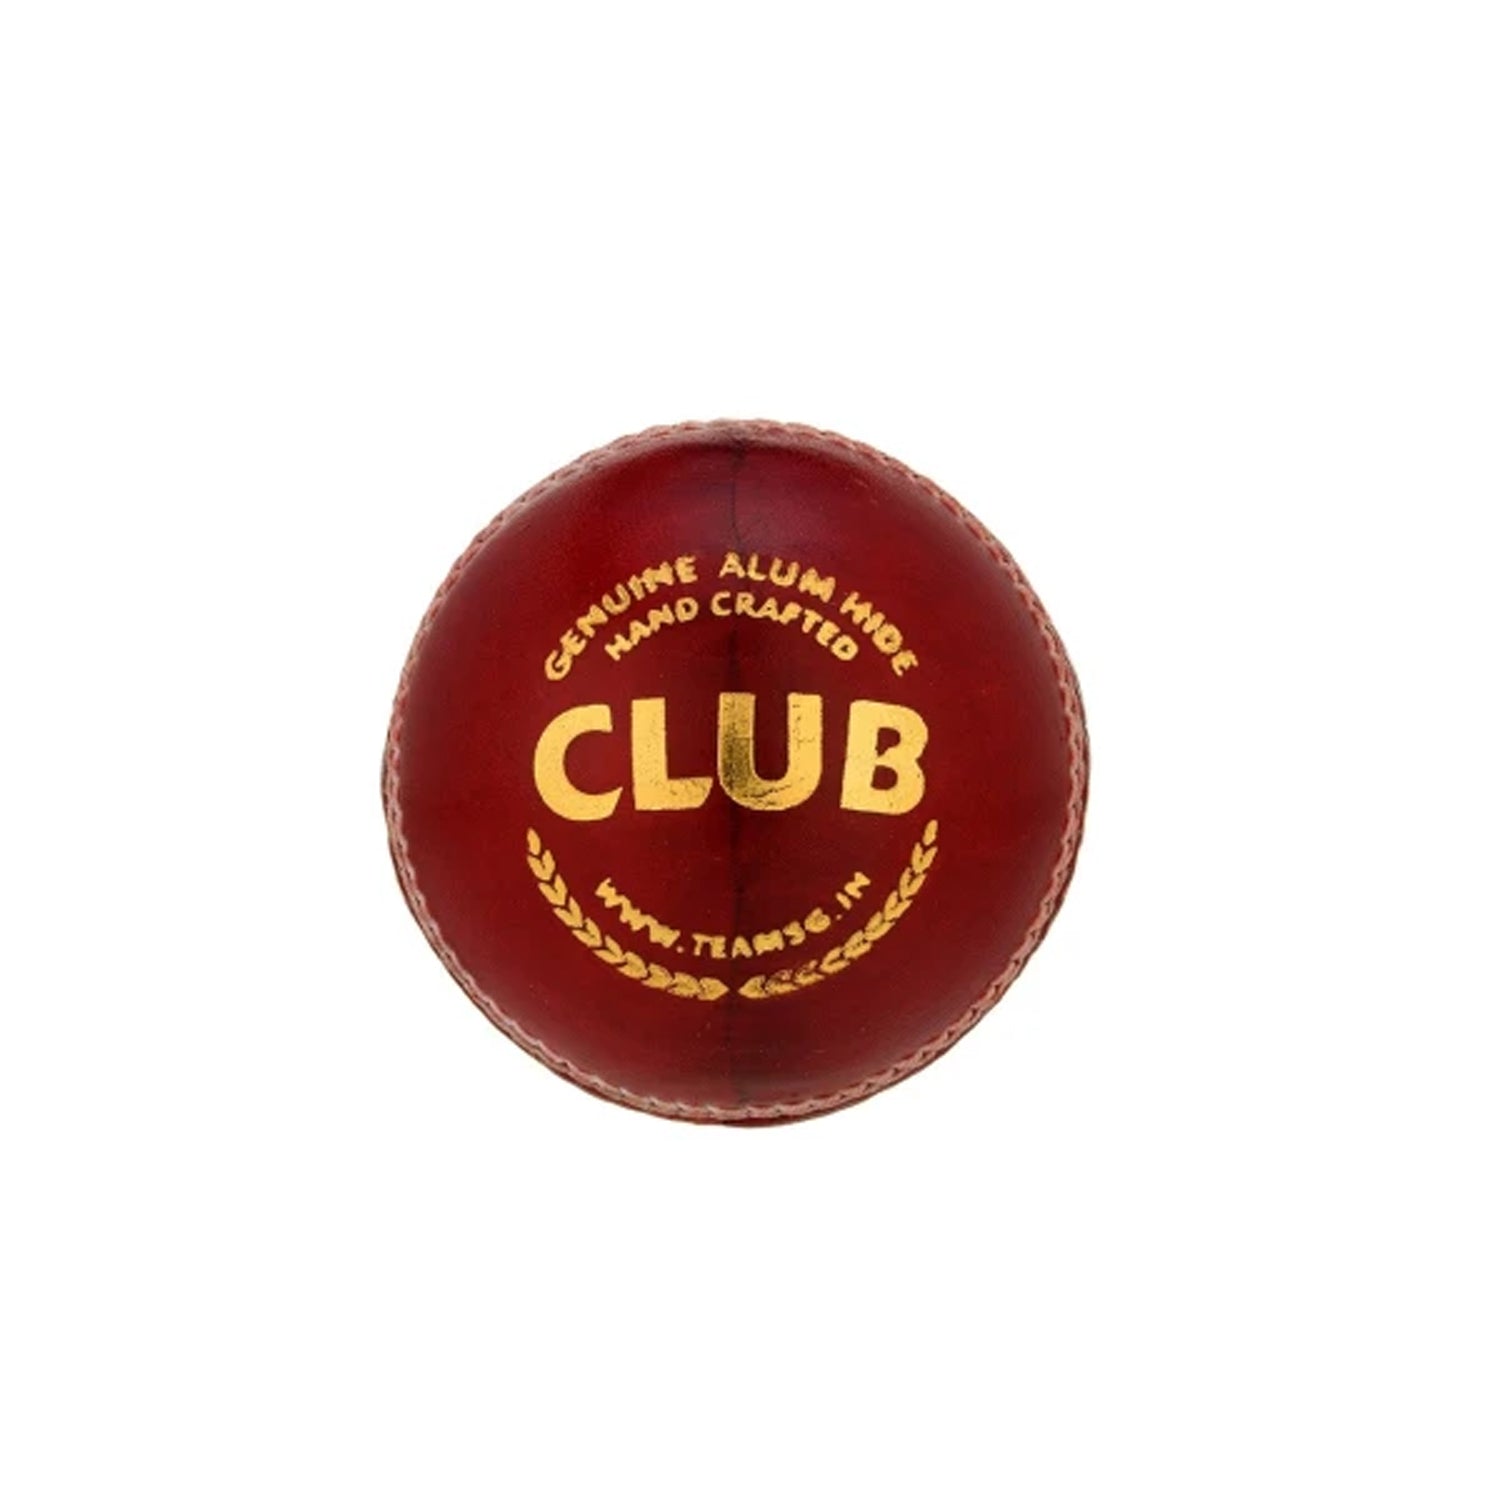 SG Club High Quality Four-Piece Water Proof Cricket Leather Ball, 1PC